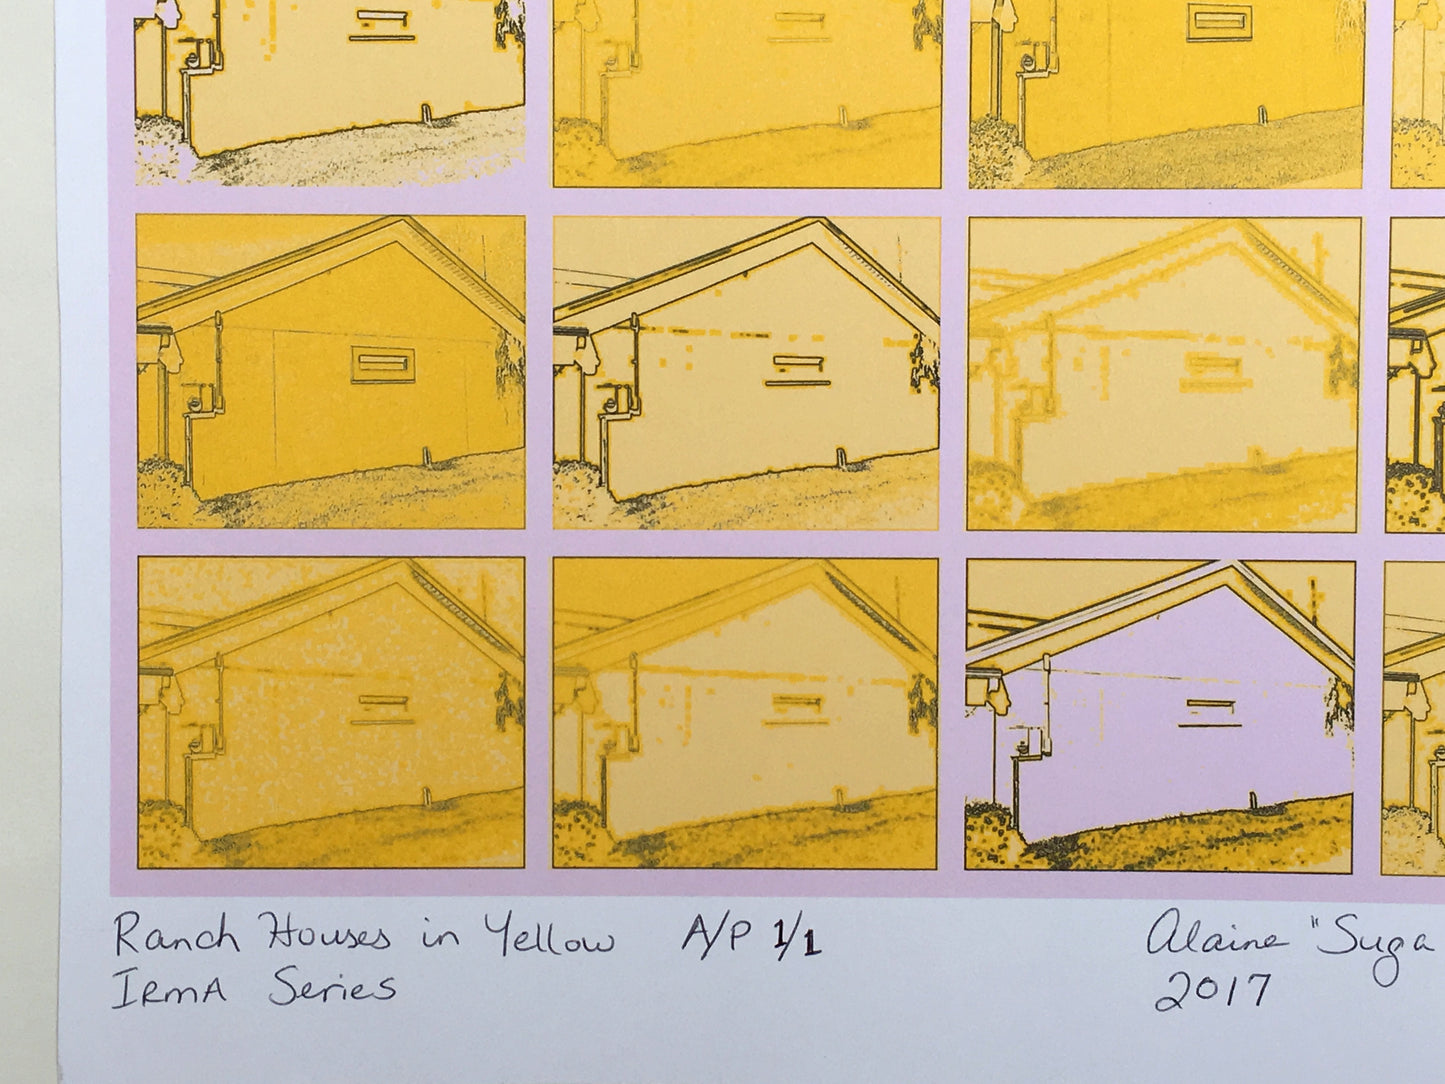 [SOLD] Suga Lane "Ranch Houses" in Yellow Artist's Proof 1/1 from Irma Series